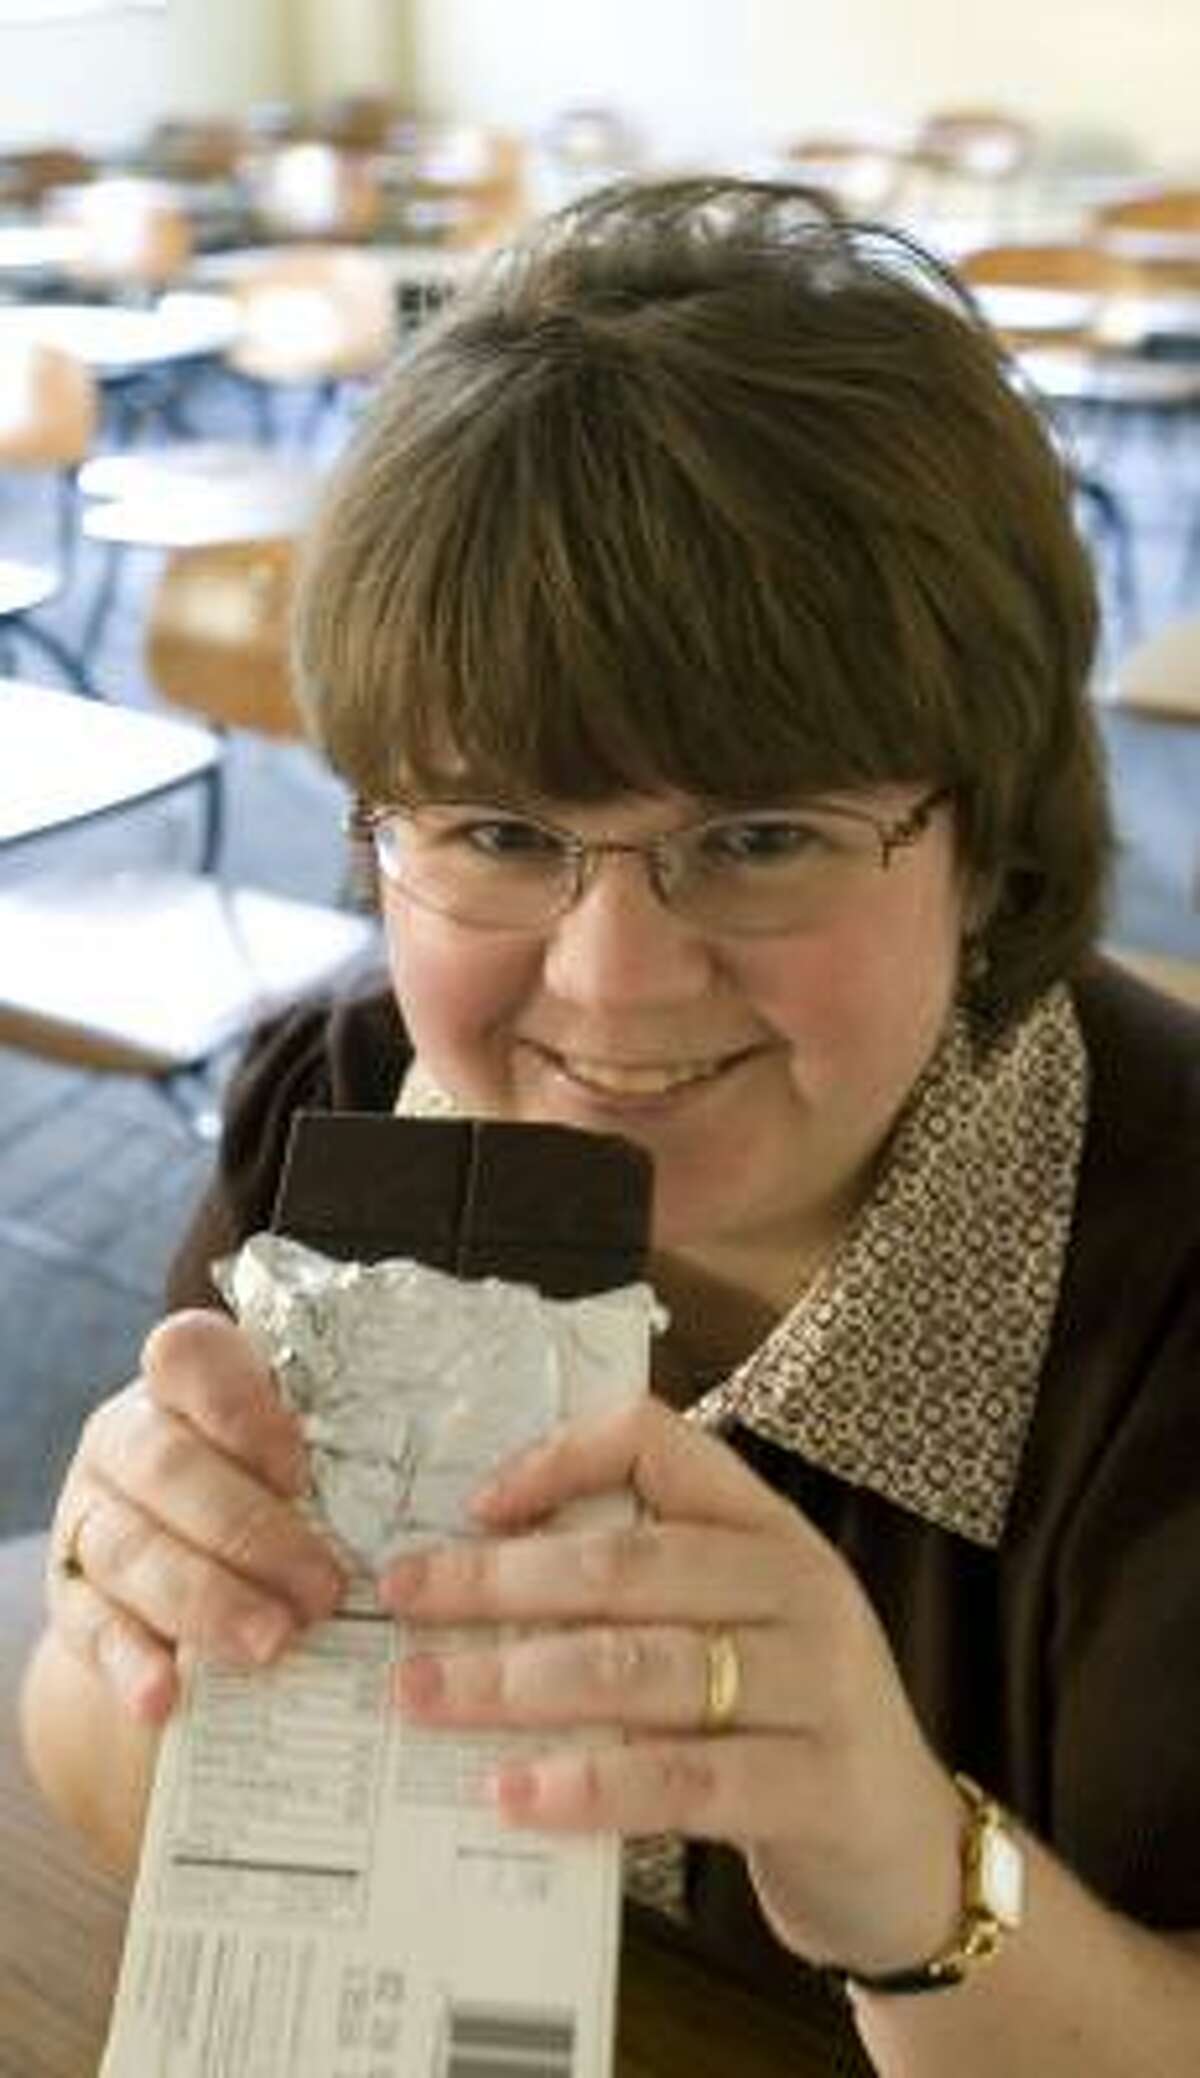 Romi Burks, a biology professor at Southwestern University, believes she has created the first college course that offers an interdisciplinary approach to chocolate.